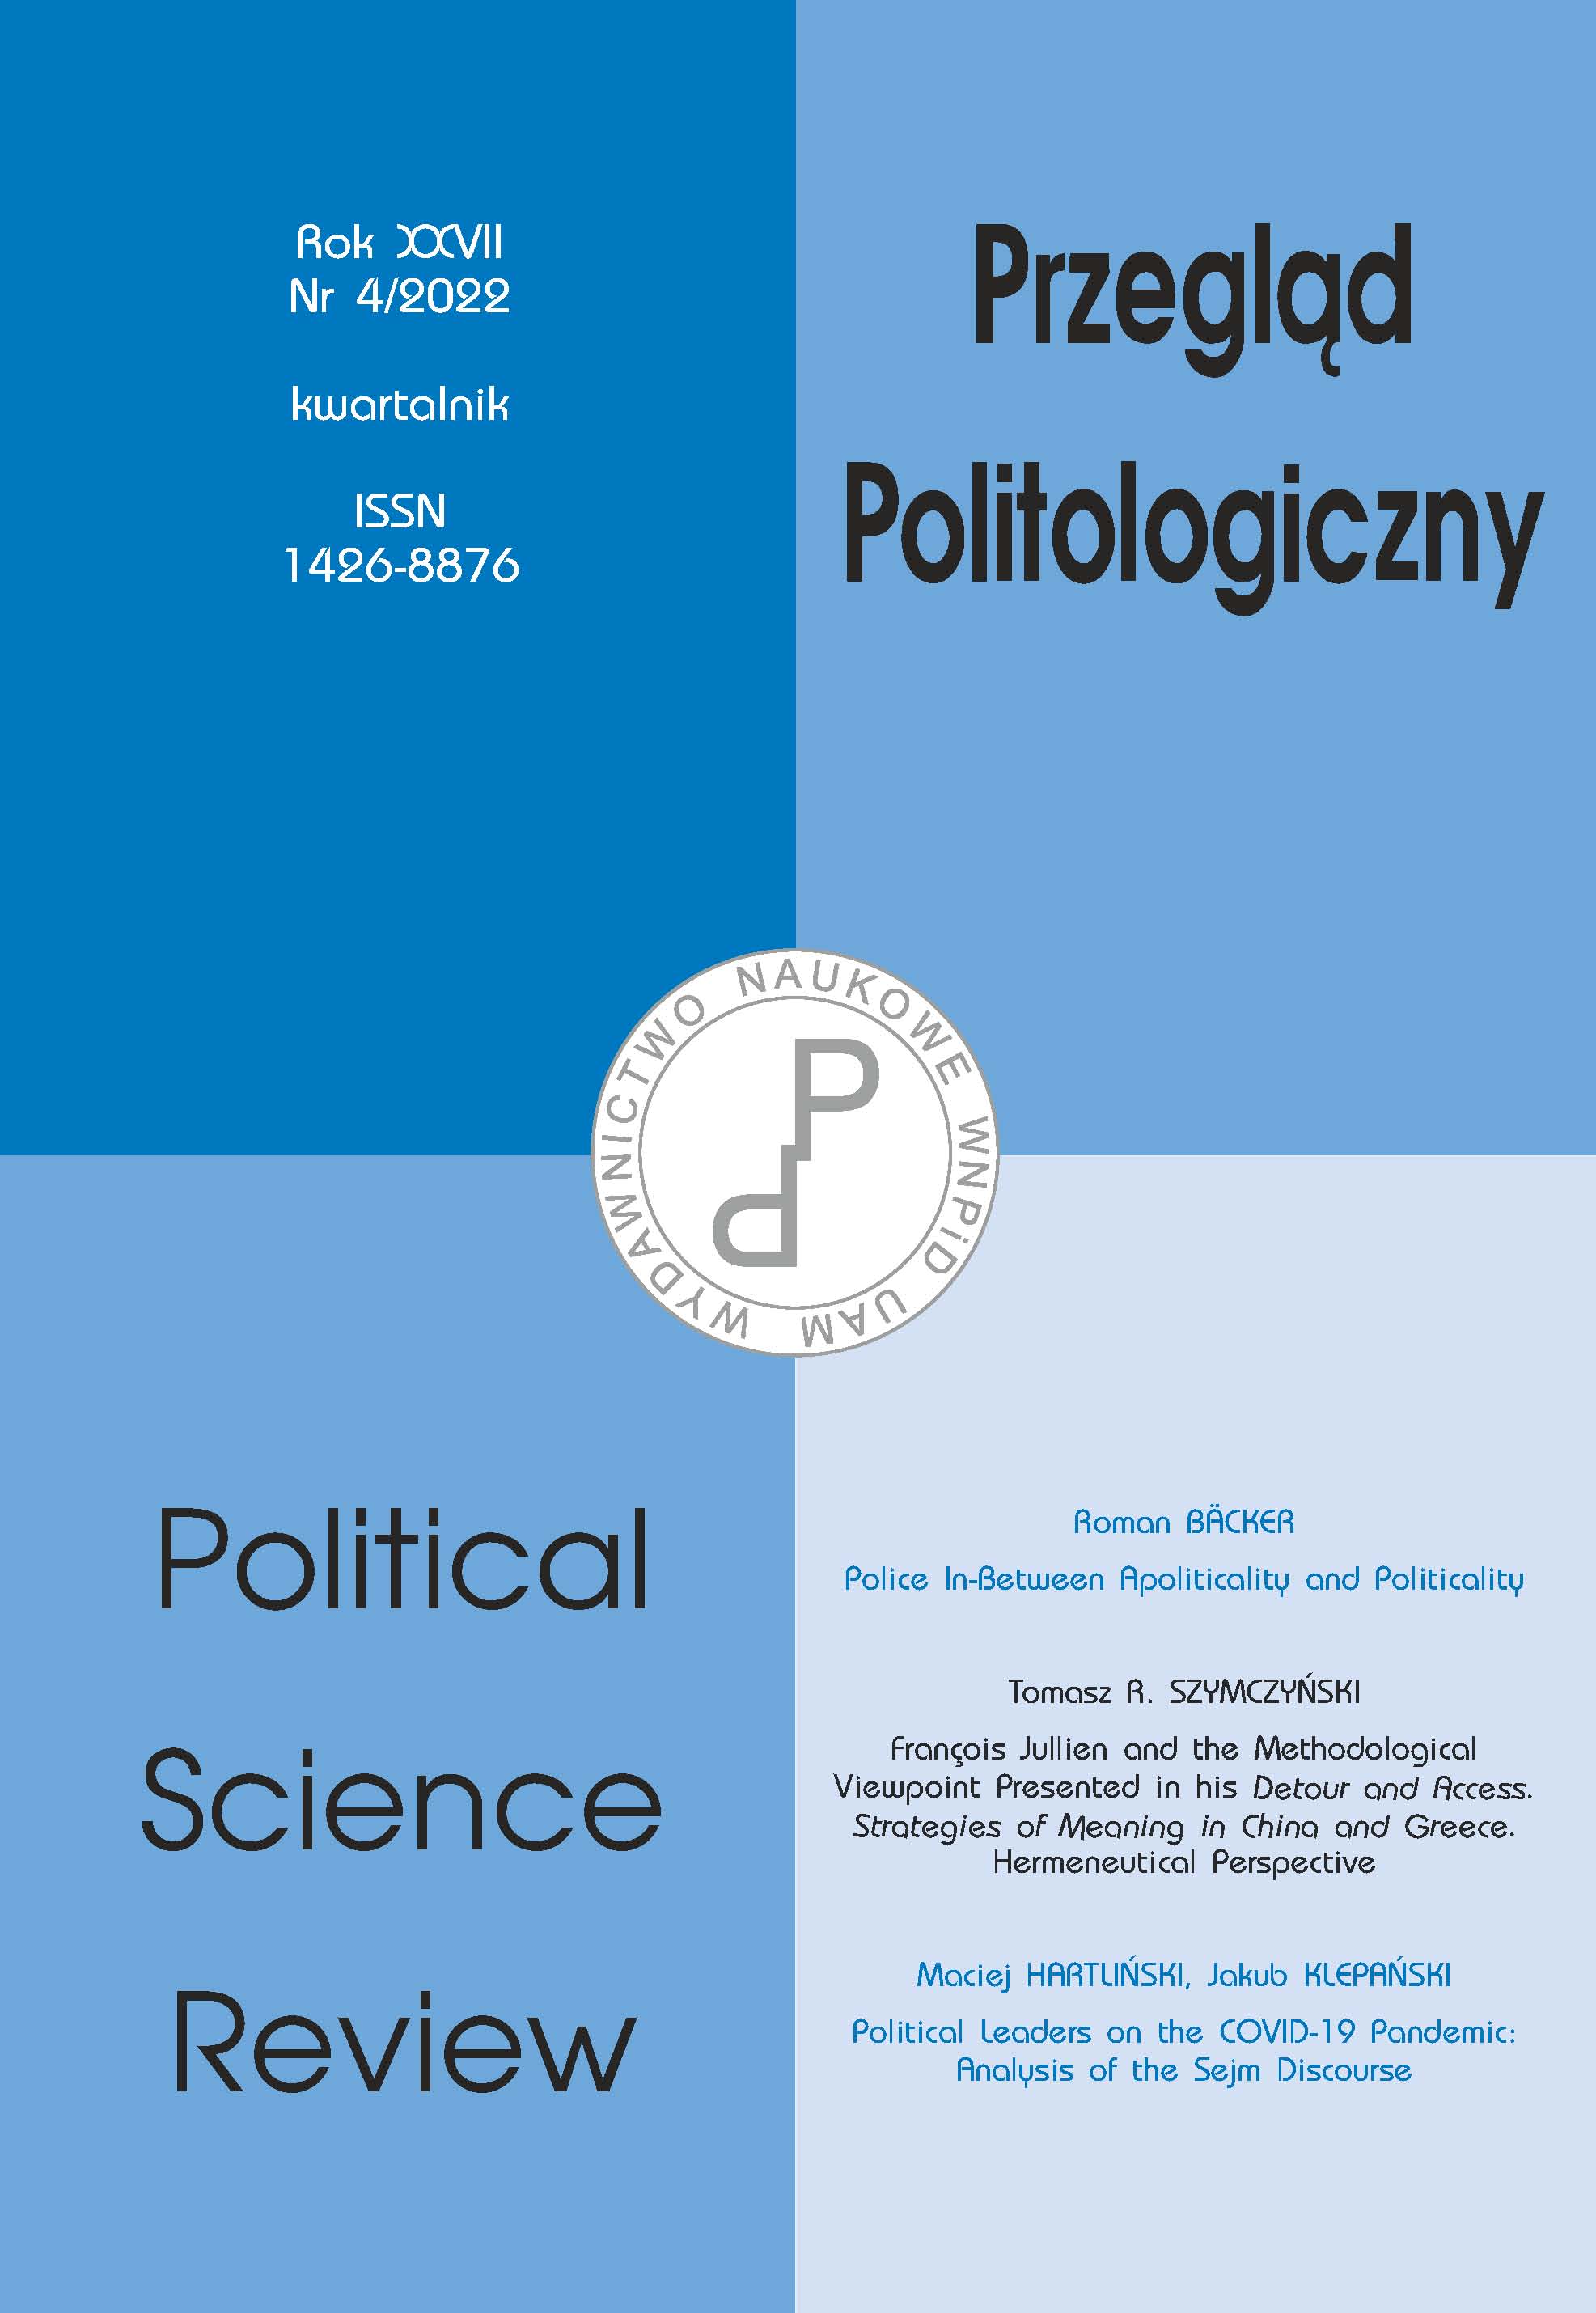 Postal Voting In the 2020 Presidential Election – How Did Electoral Participation Evolved During the COVID-19 Pandemic? Cover Image